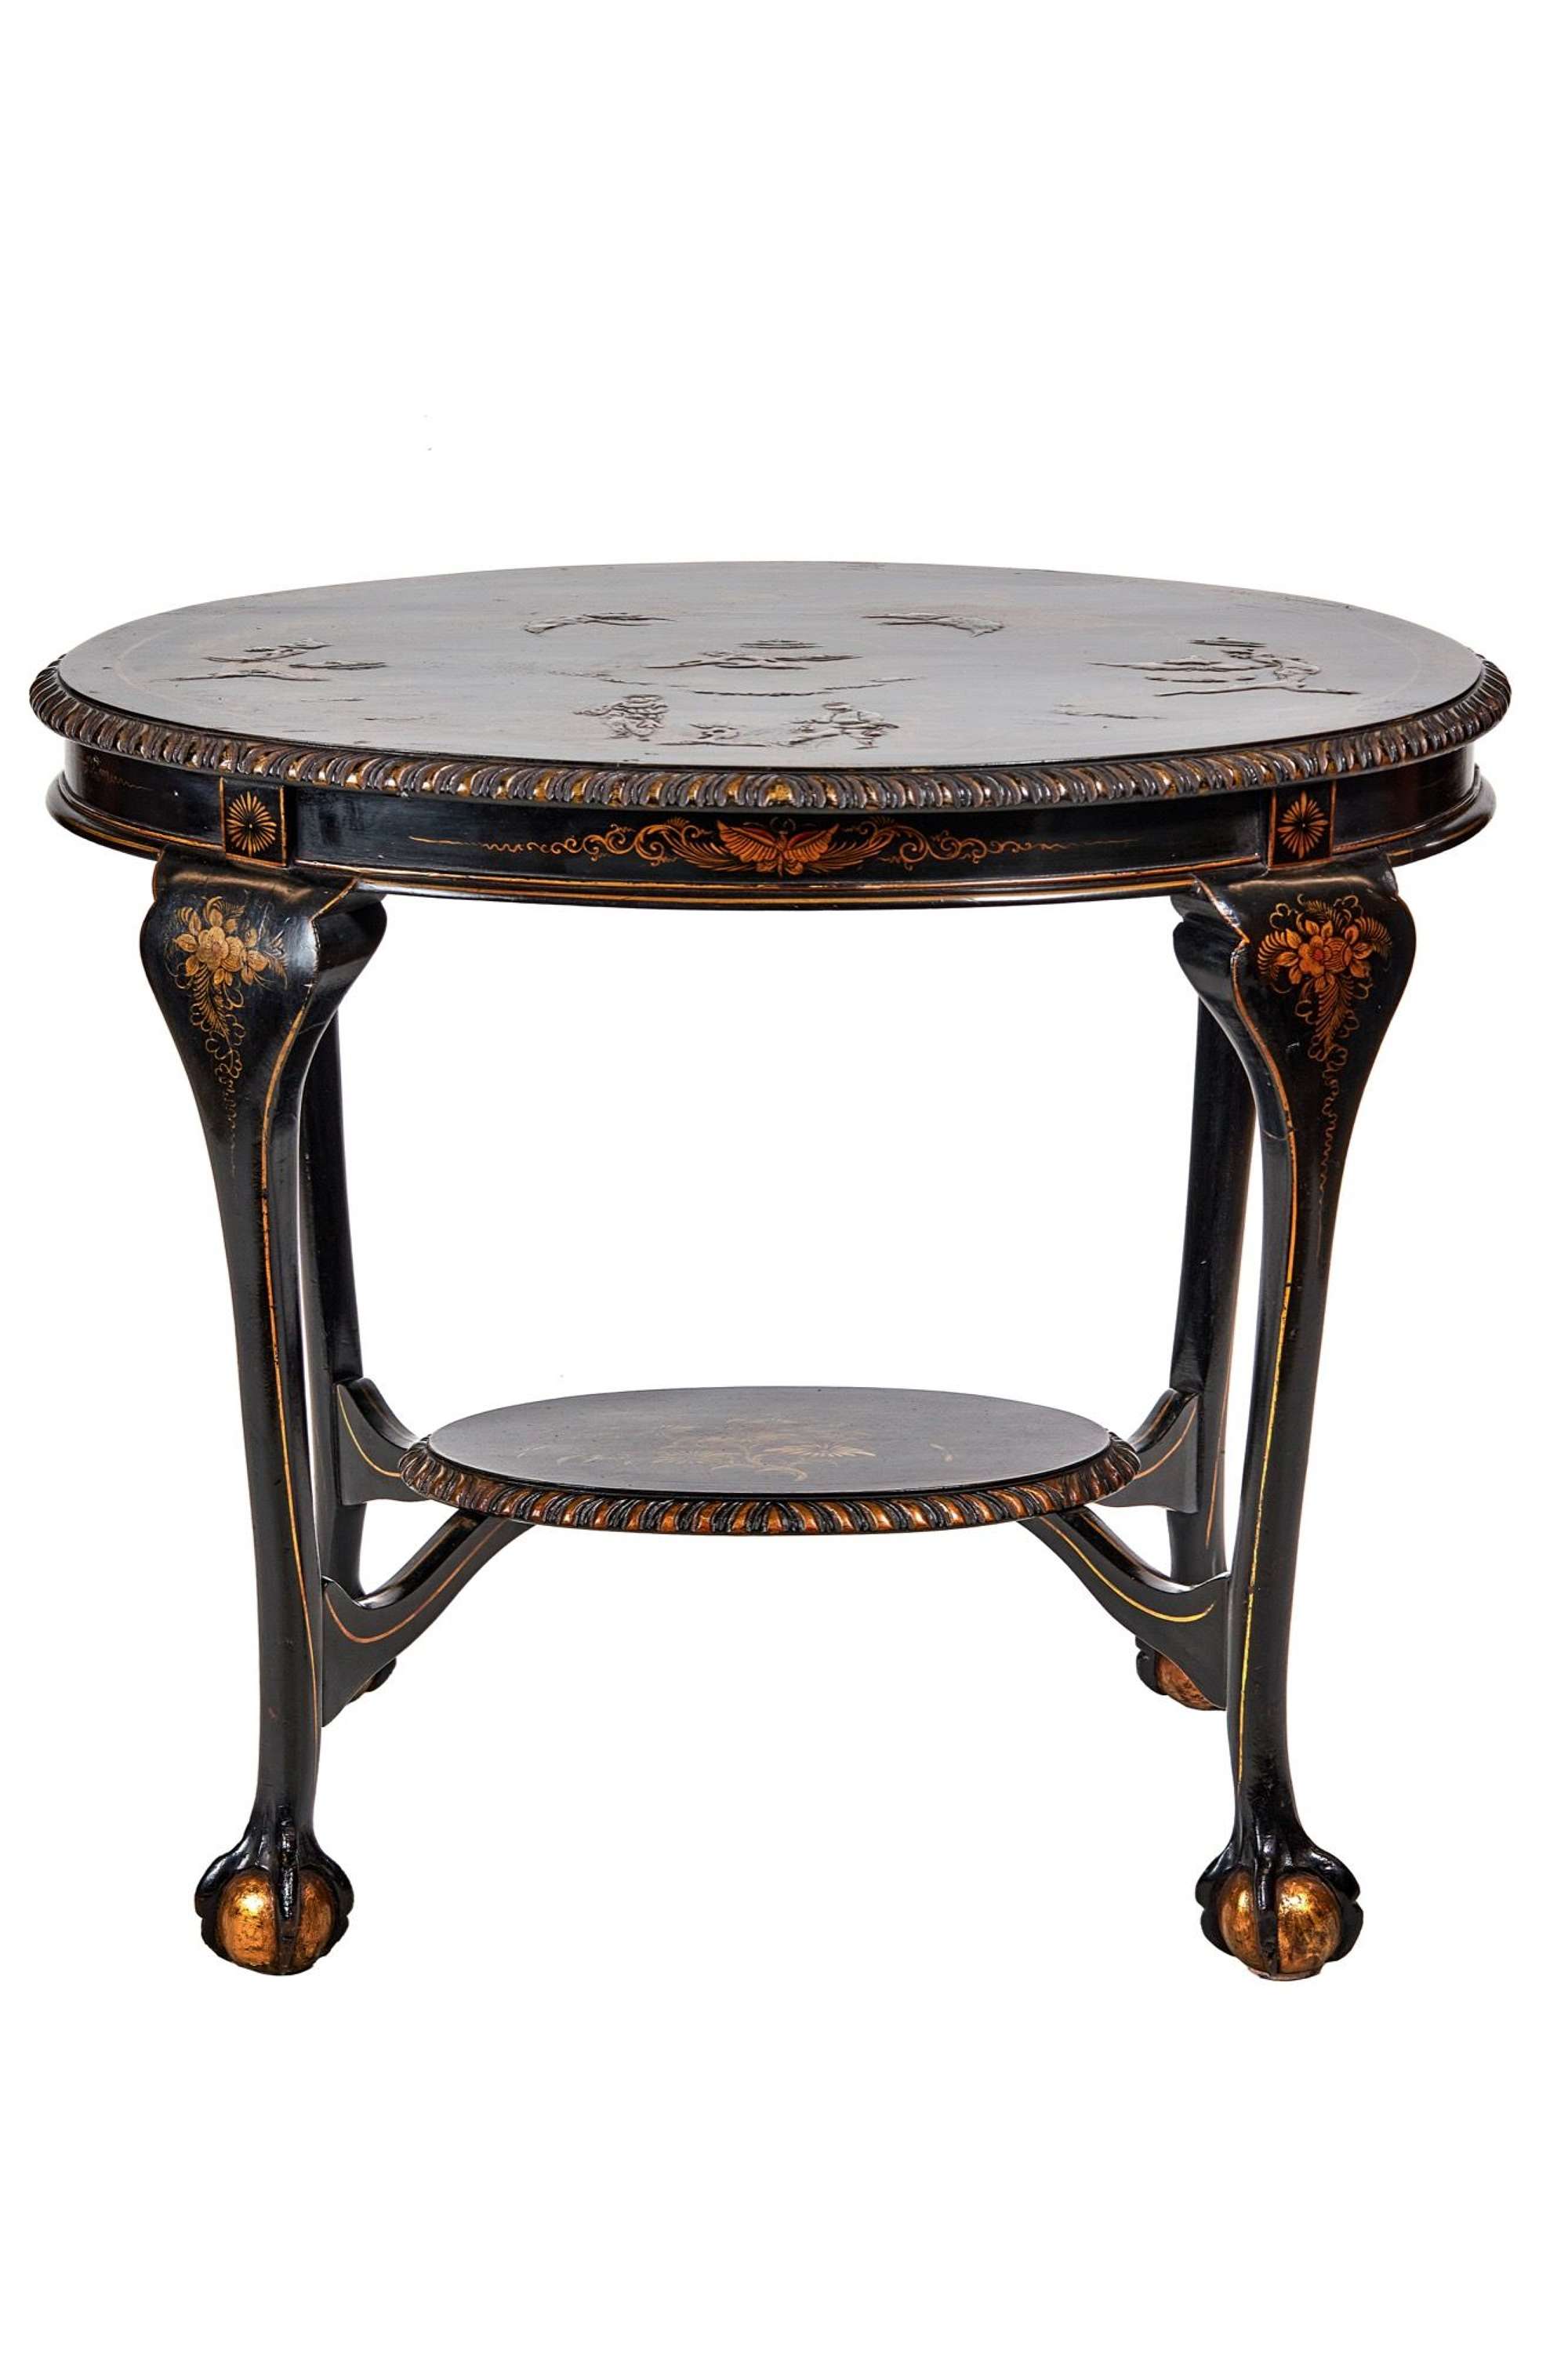 Chinoiserie Decorated Oval 2 tier table circa 1900